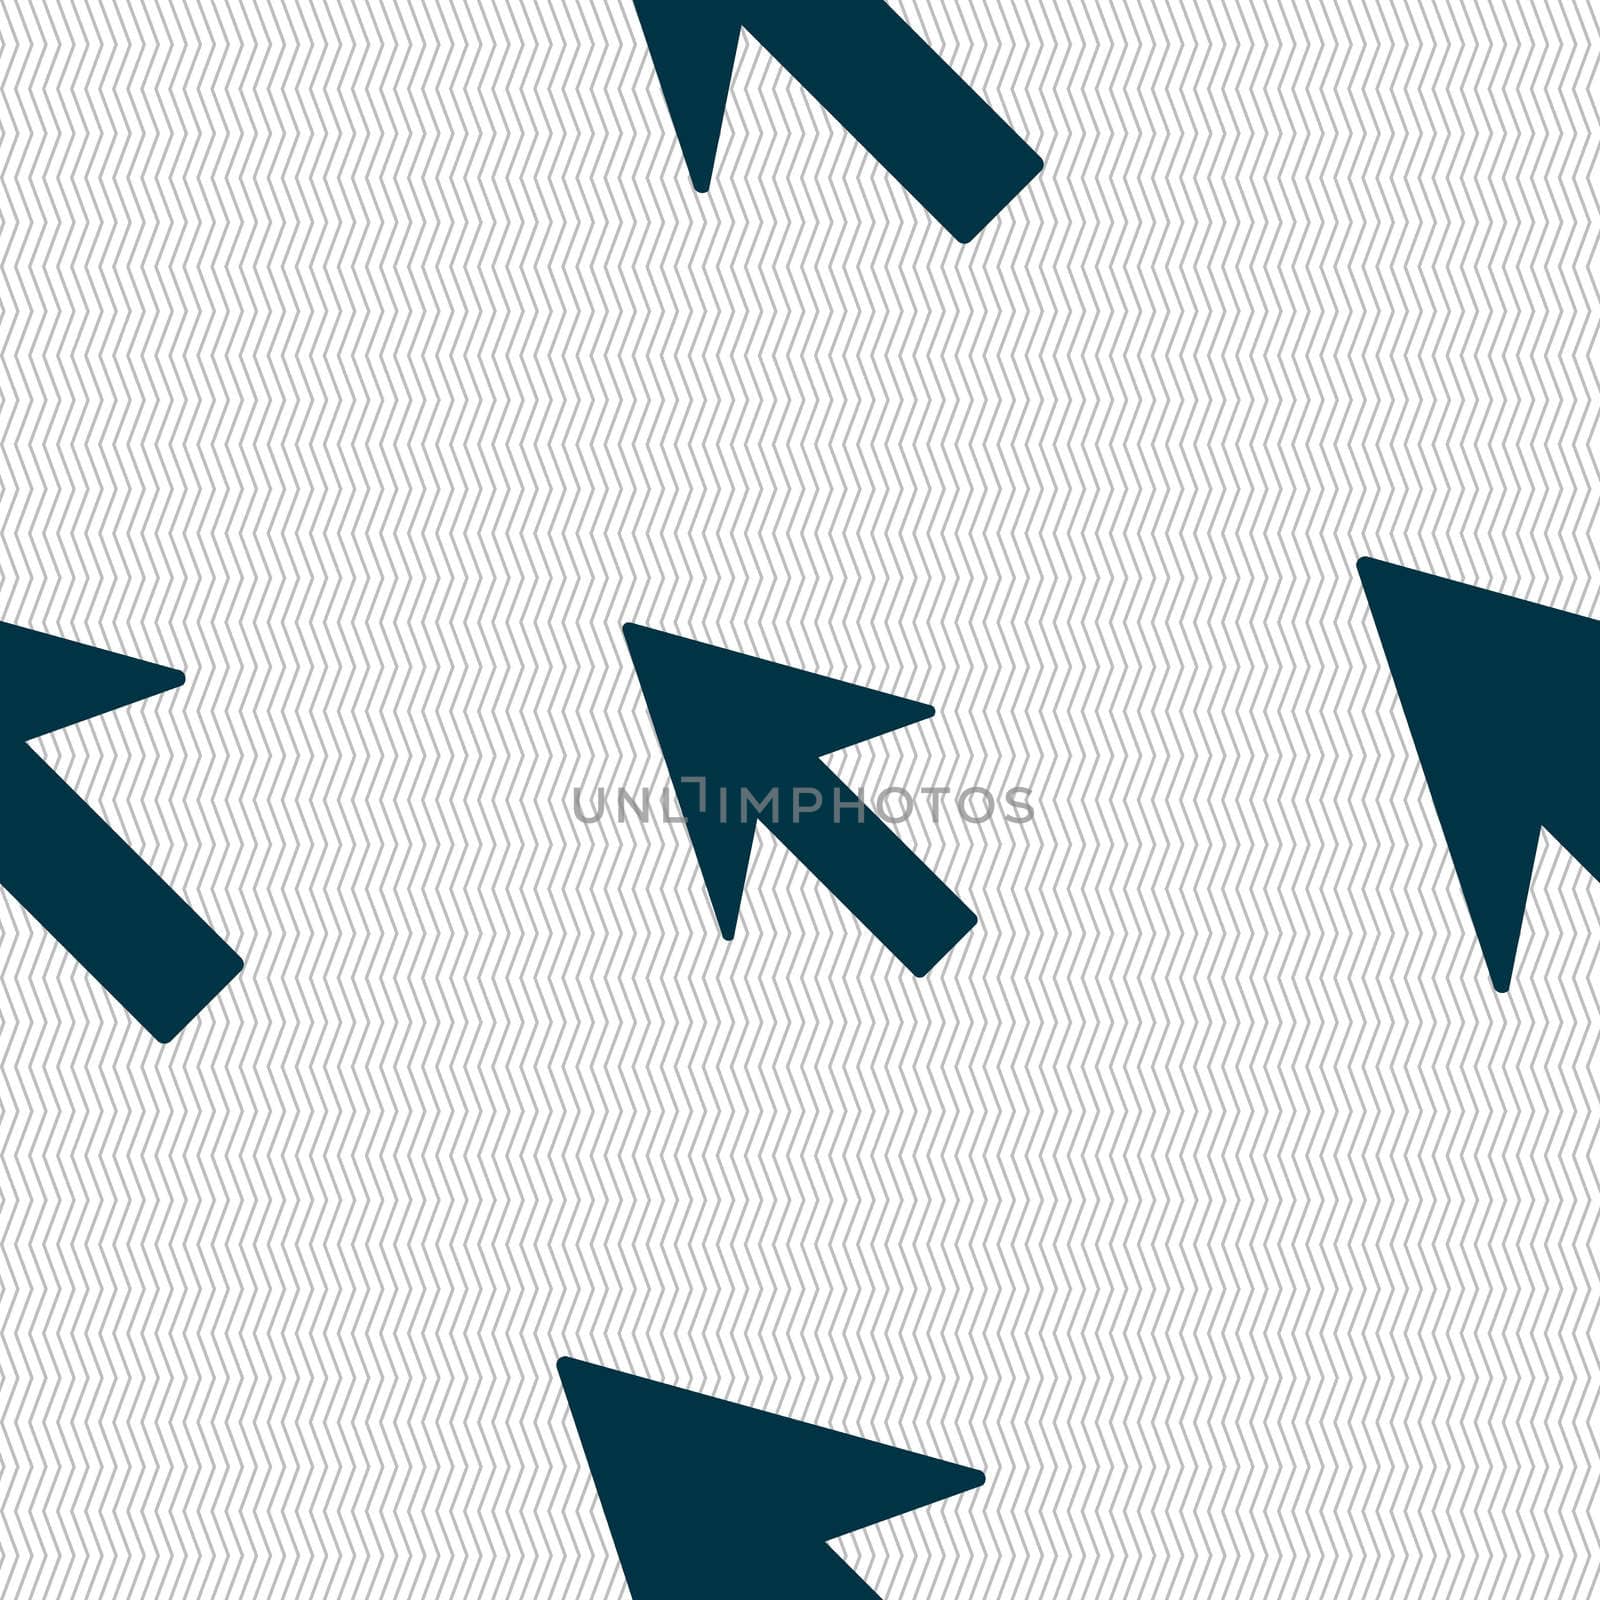 Cursor, arrow icon sign. Seamless abstract background with geometric shapes. illustration